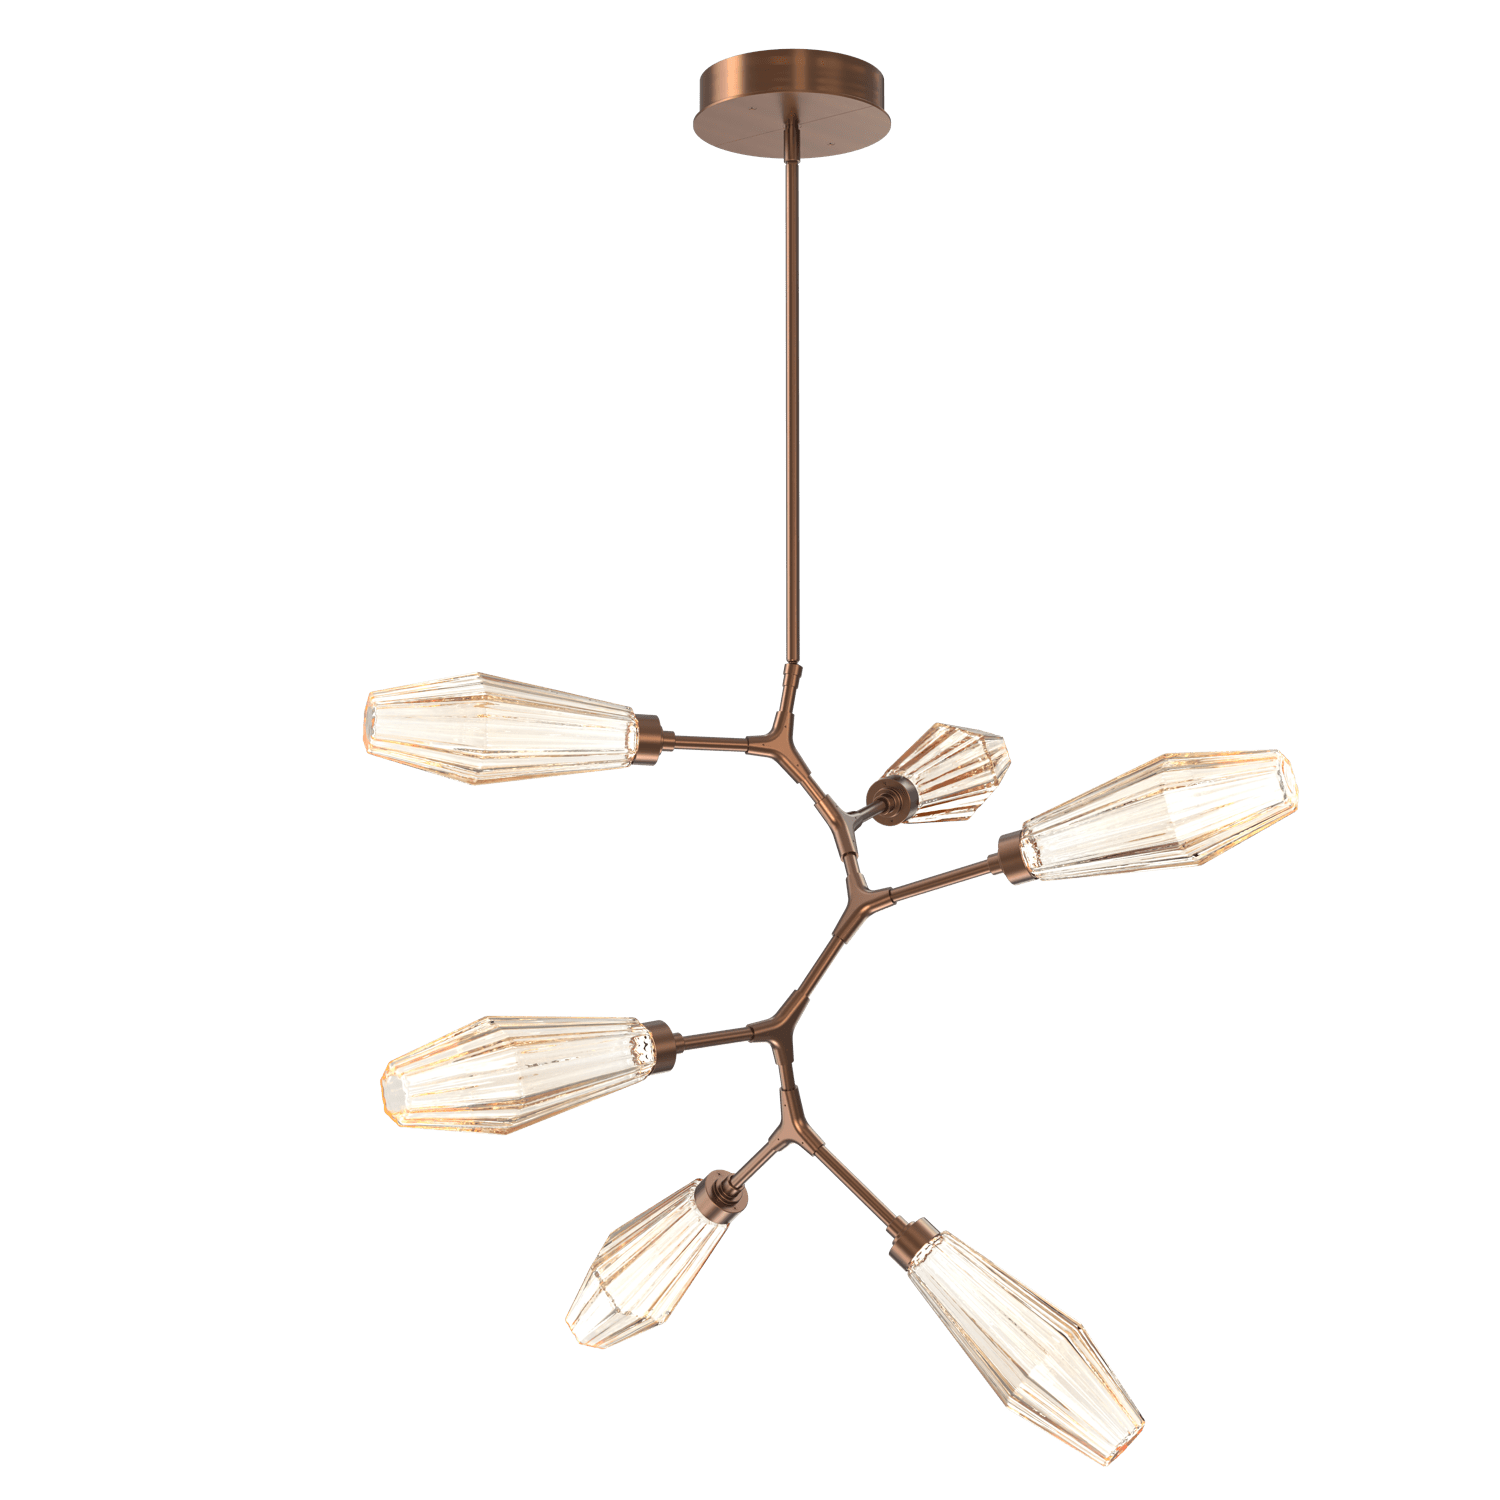 CHB0049-VA-RB-RA-Hammerton-Studio-Aalto-6-light-modern-vine-chandelier-with-oil-rubbed-bronze-finish-and-optic-ribbed-amber-glass-shades-and-LED-lamping